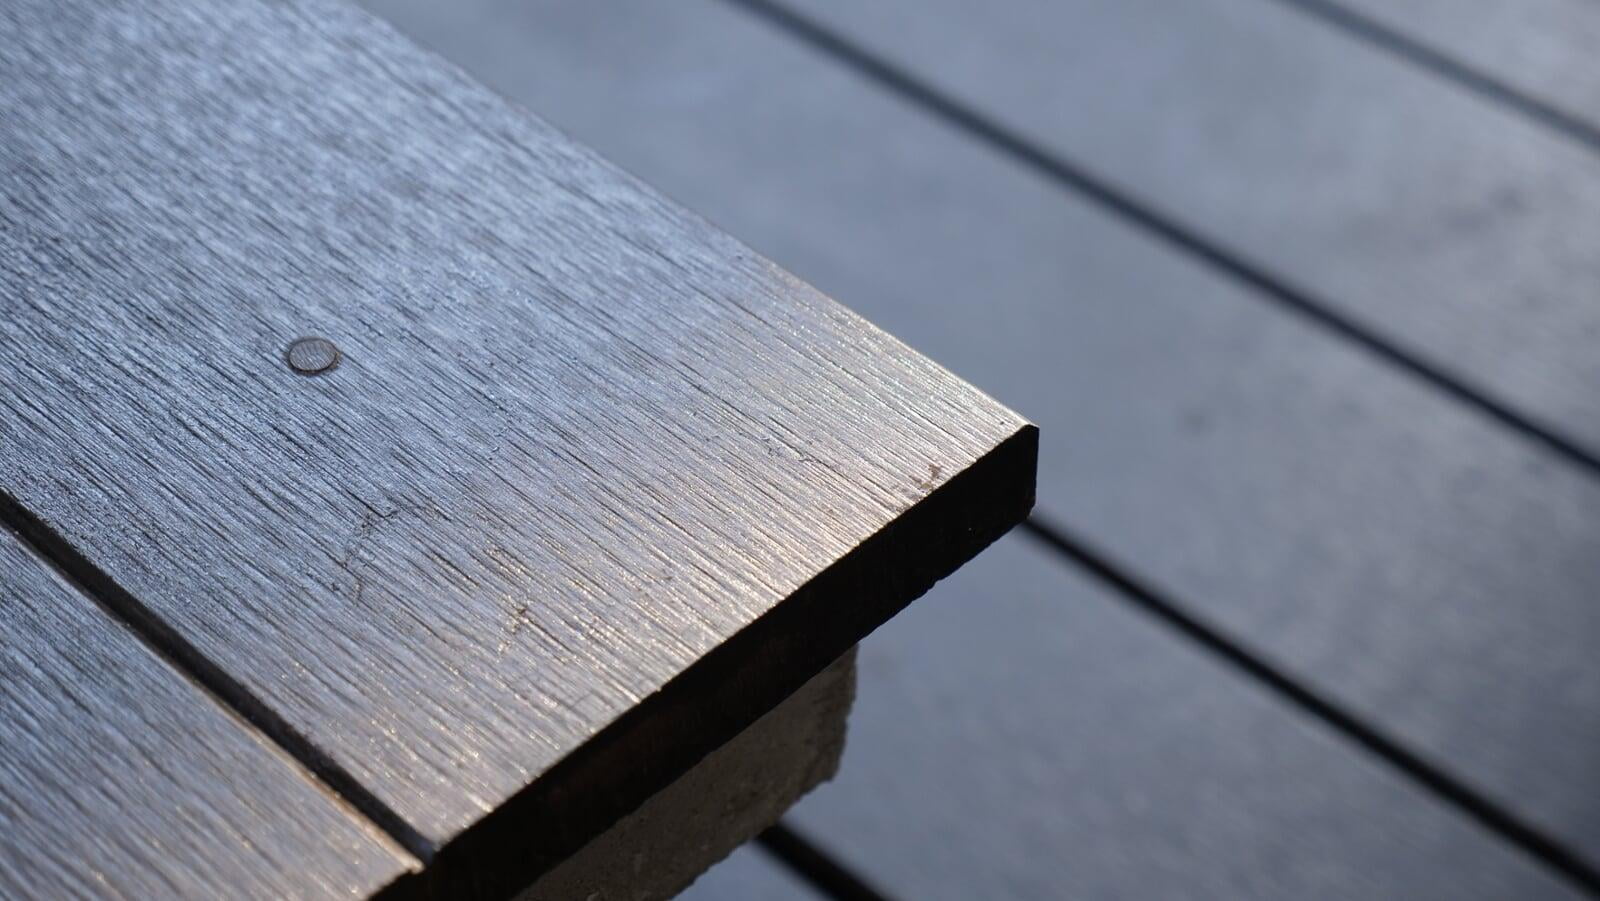 SHERA decking plank is an A2s1d0 rated fire resistant decking material